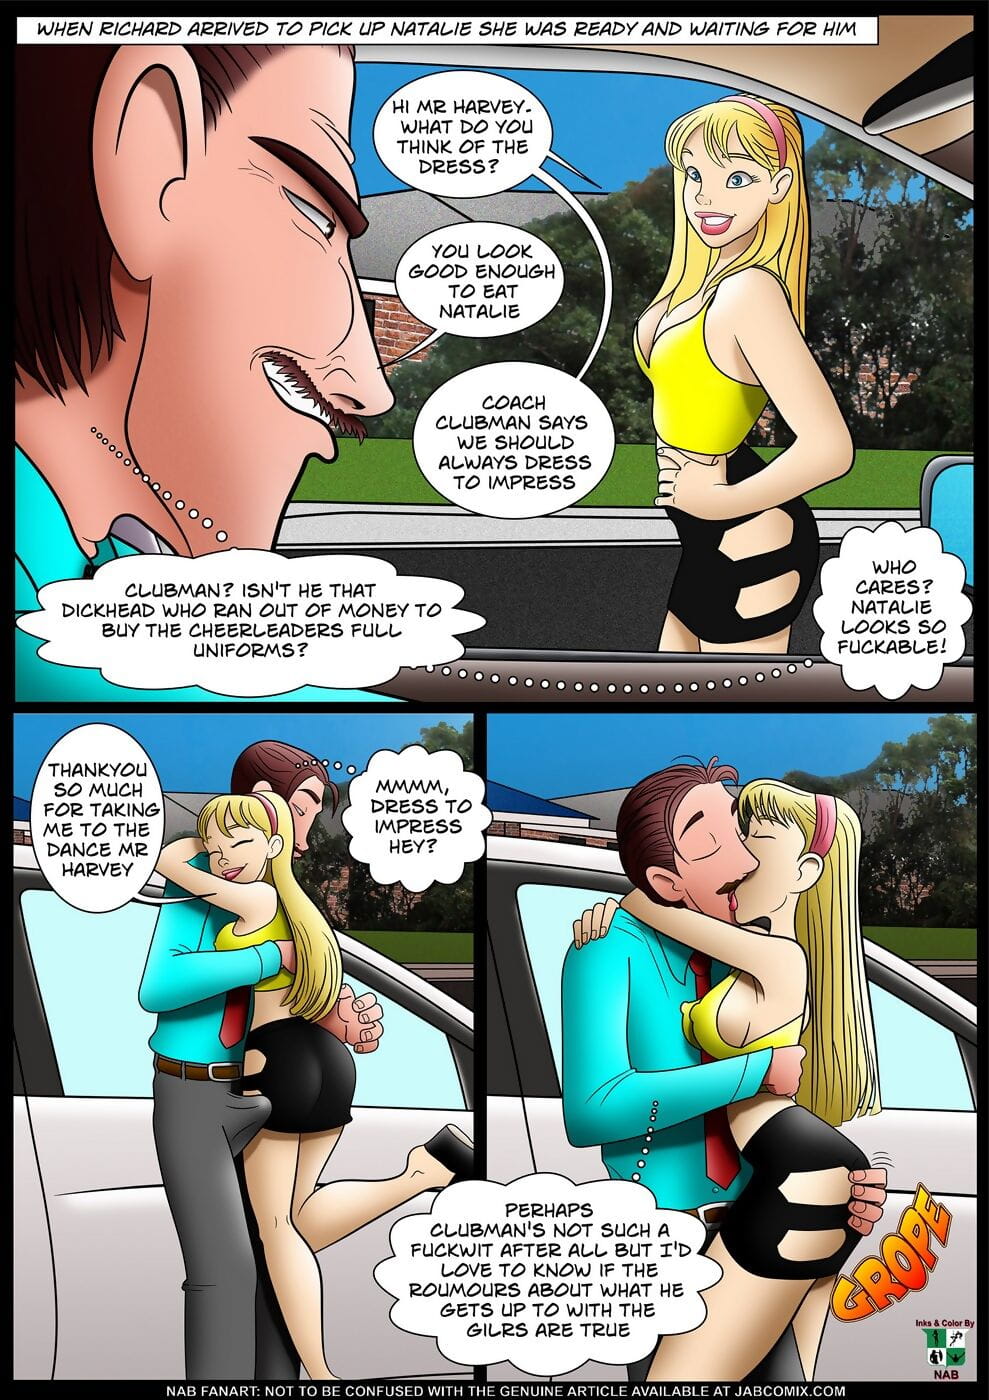 nab Oh daddy! – who’s Uw daddy? page 1